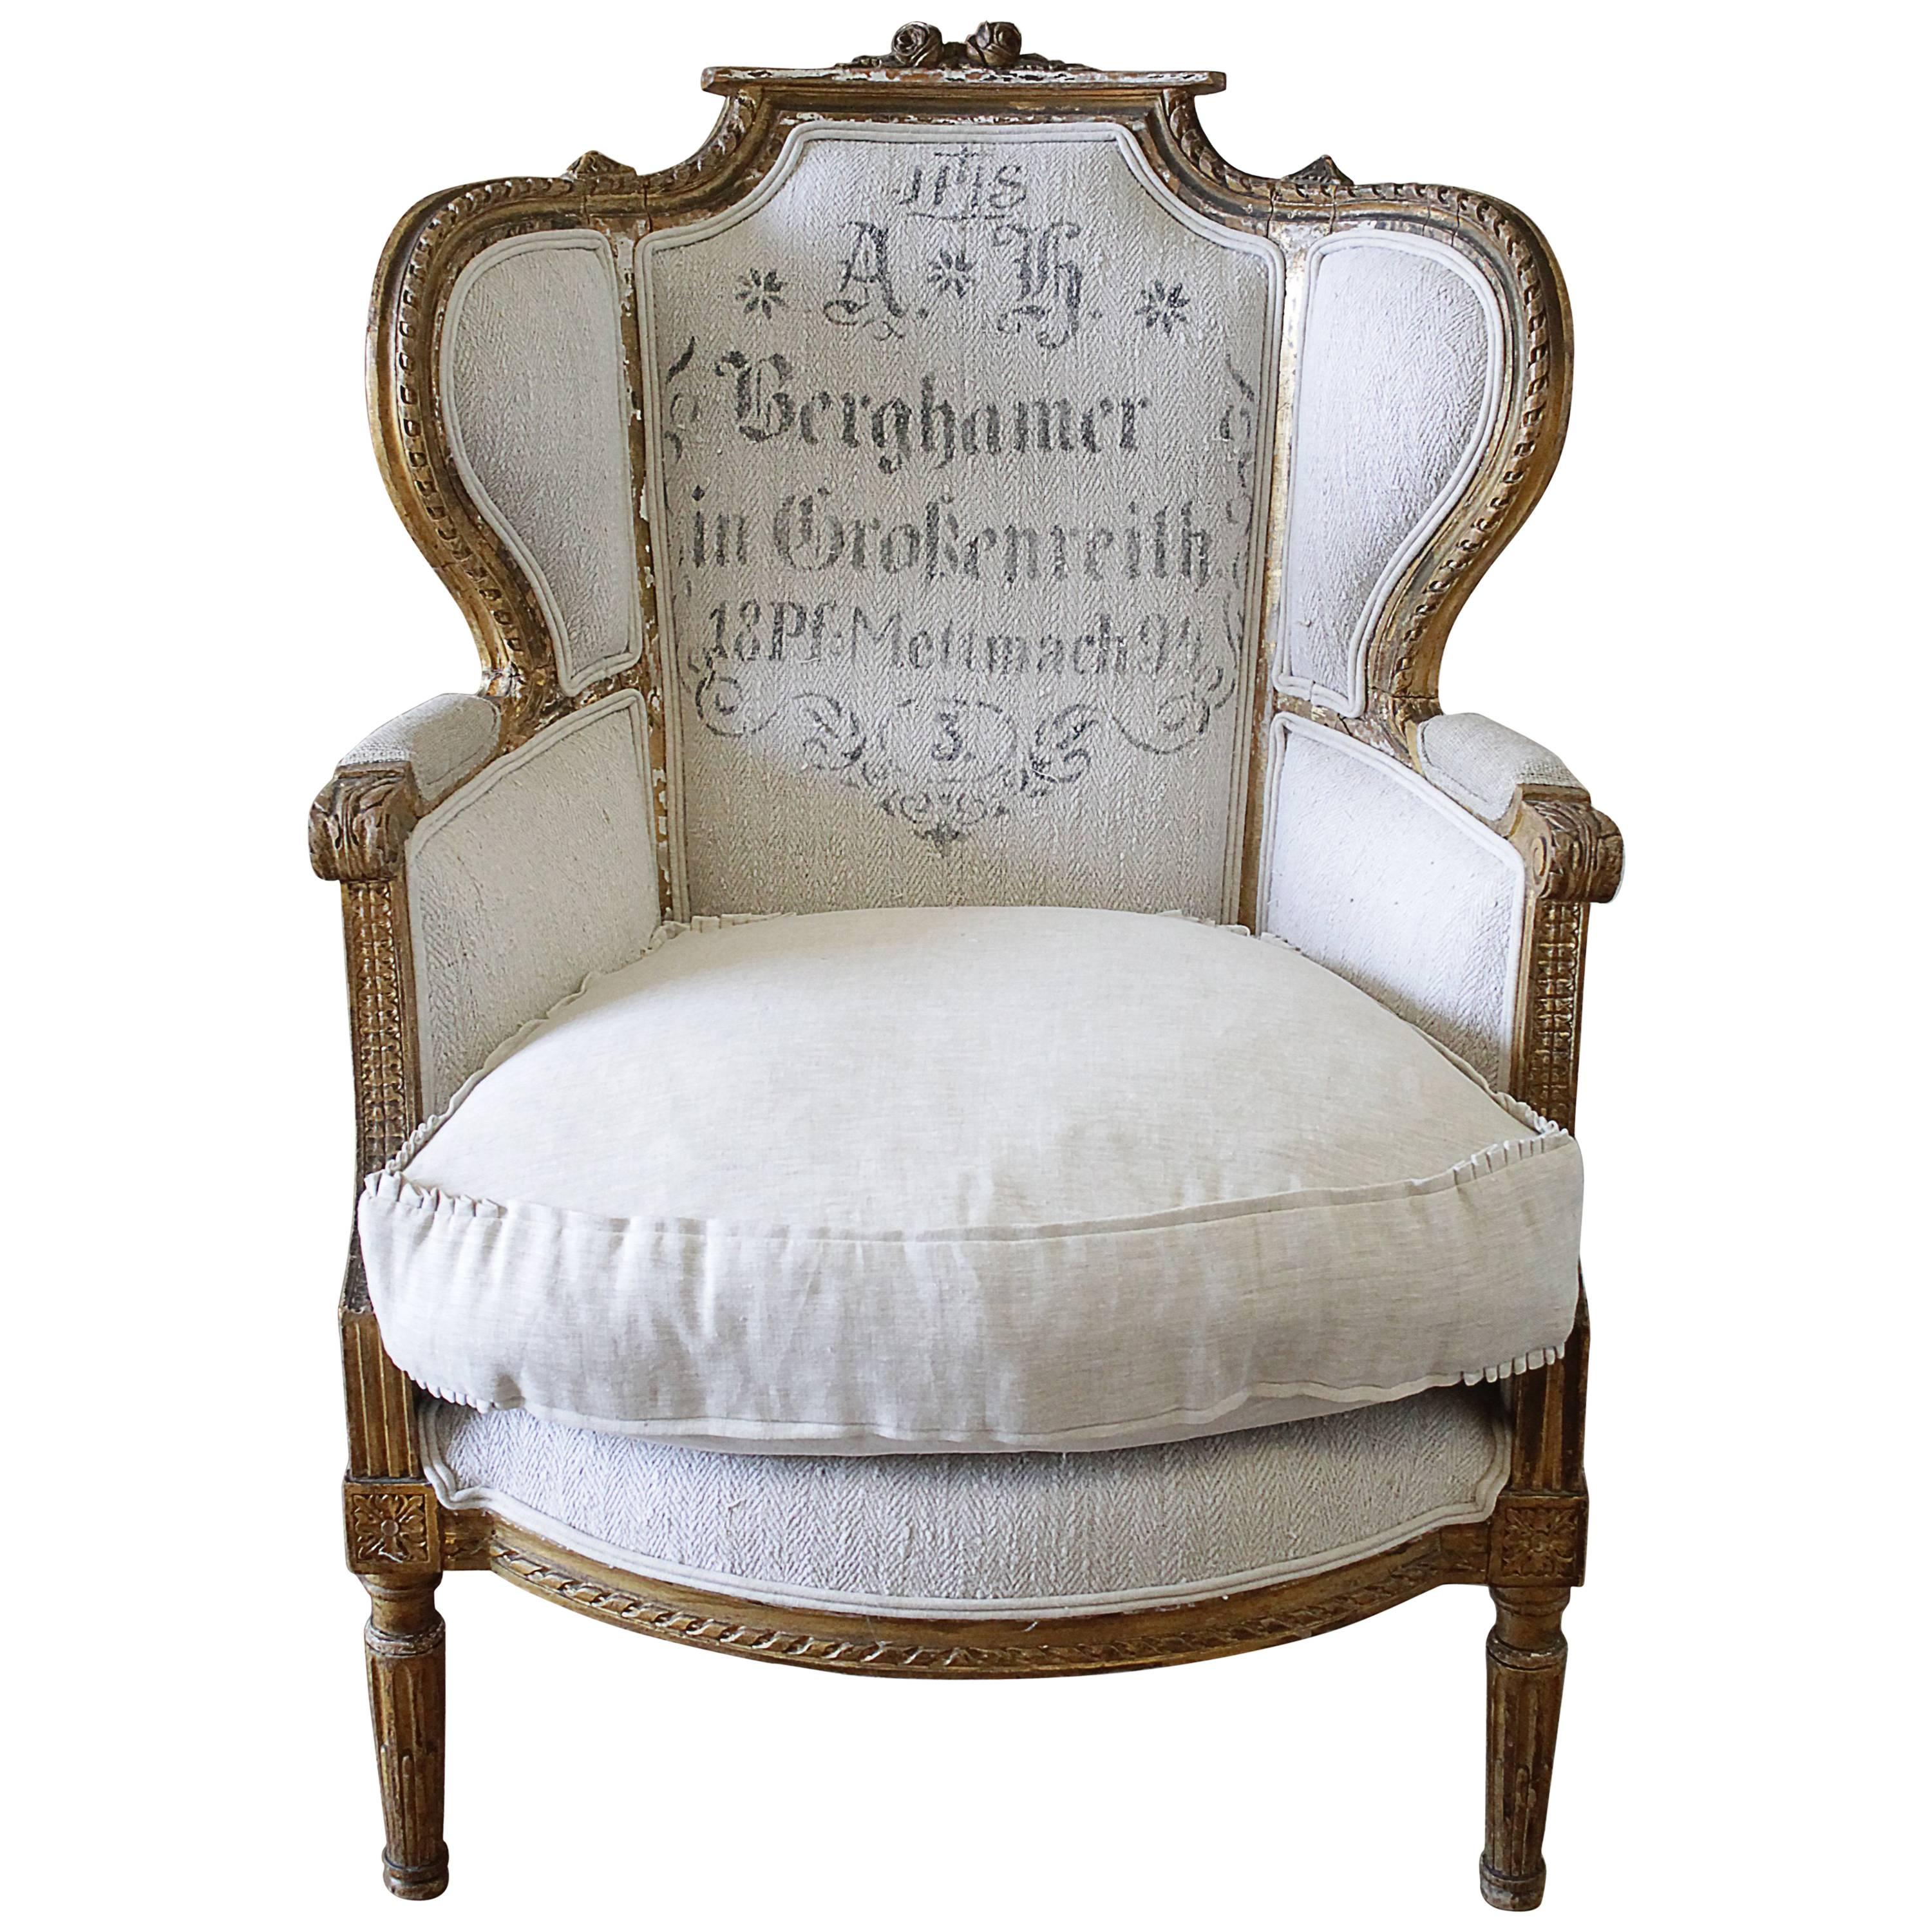 Antique French Louis XVI Style Wing Chair in Antique Grain Sack Upholstery